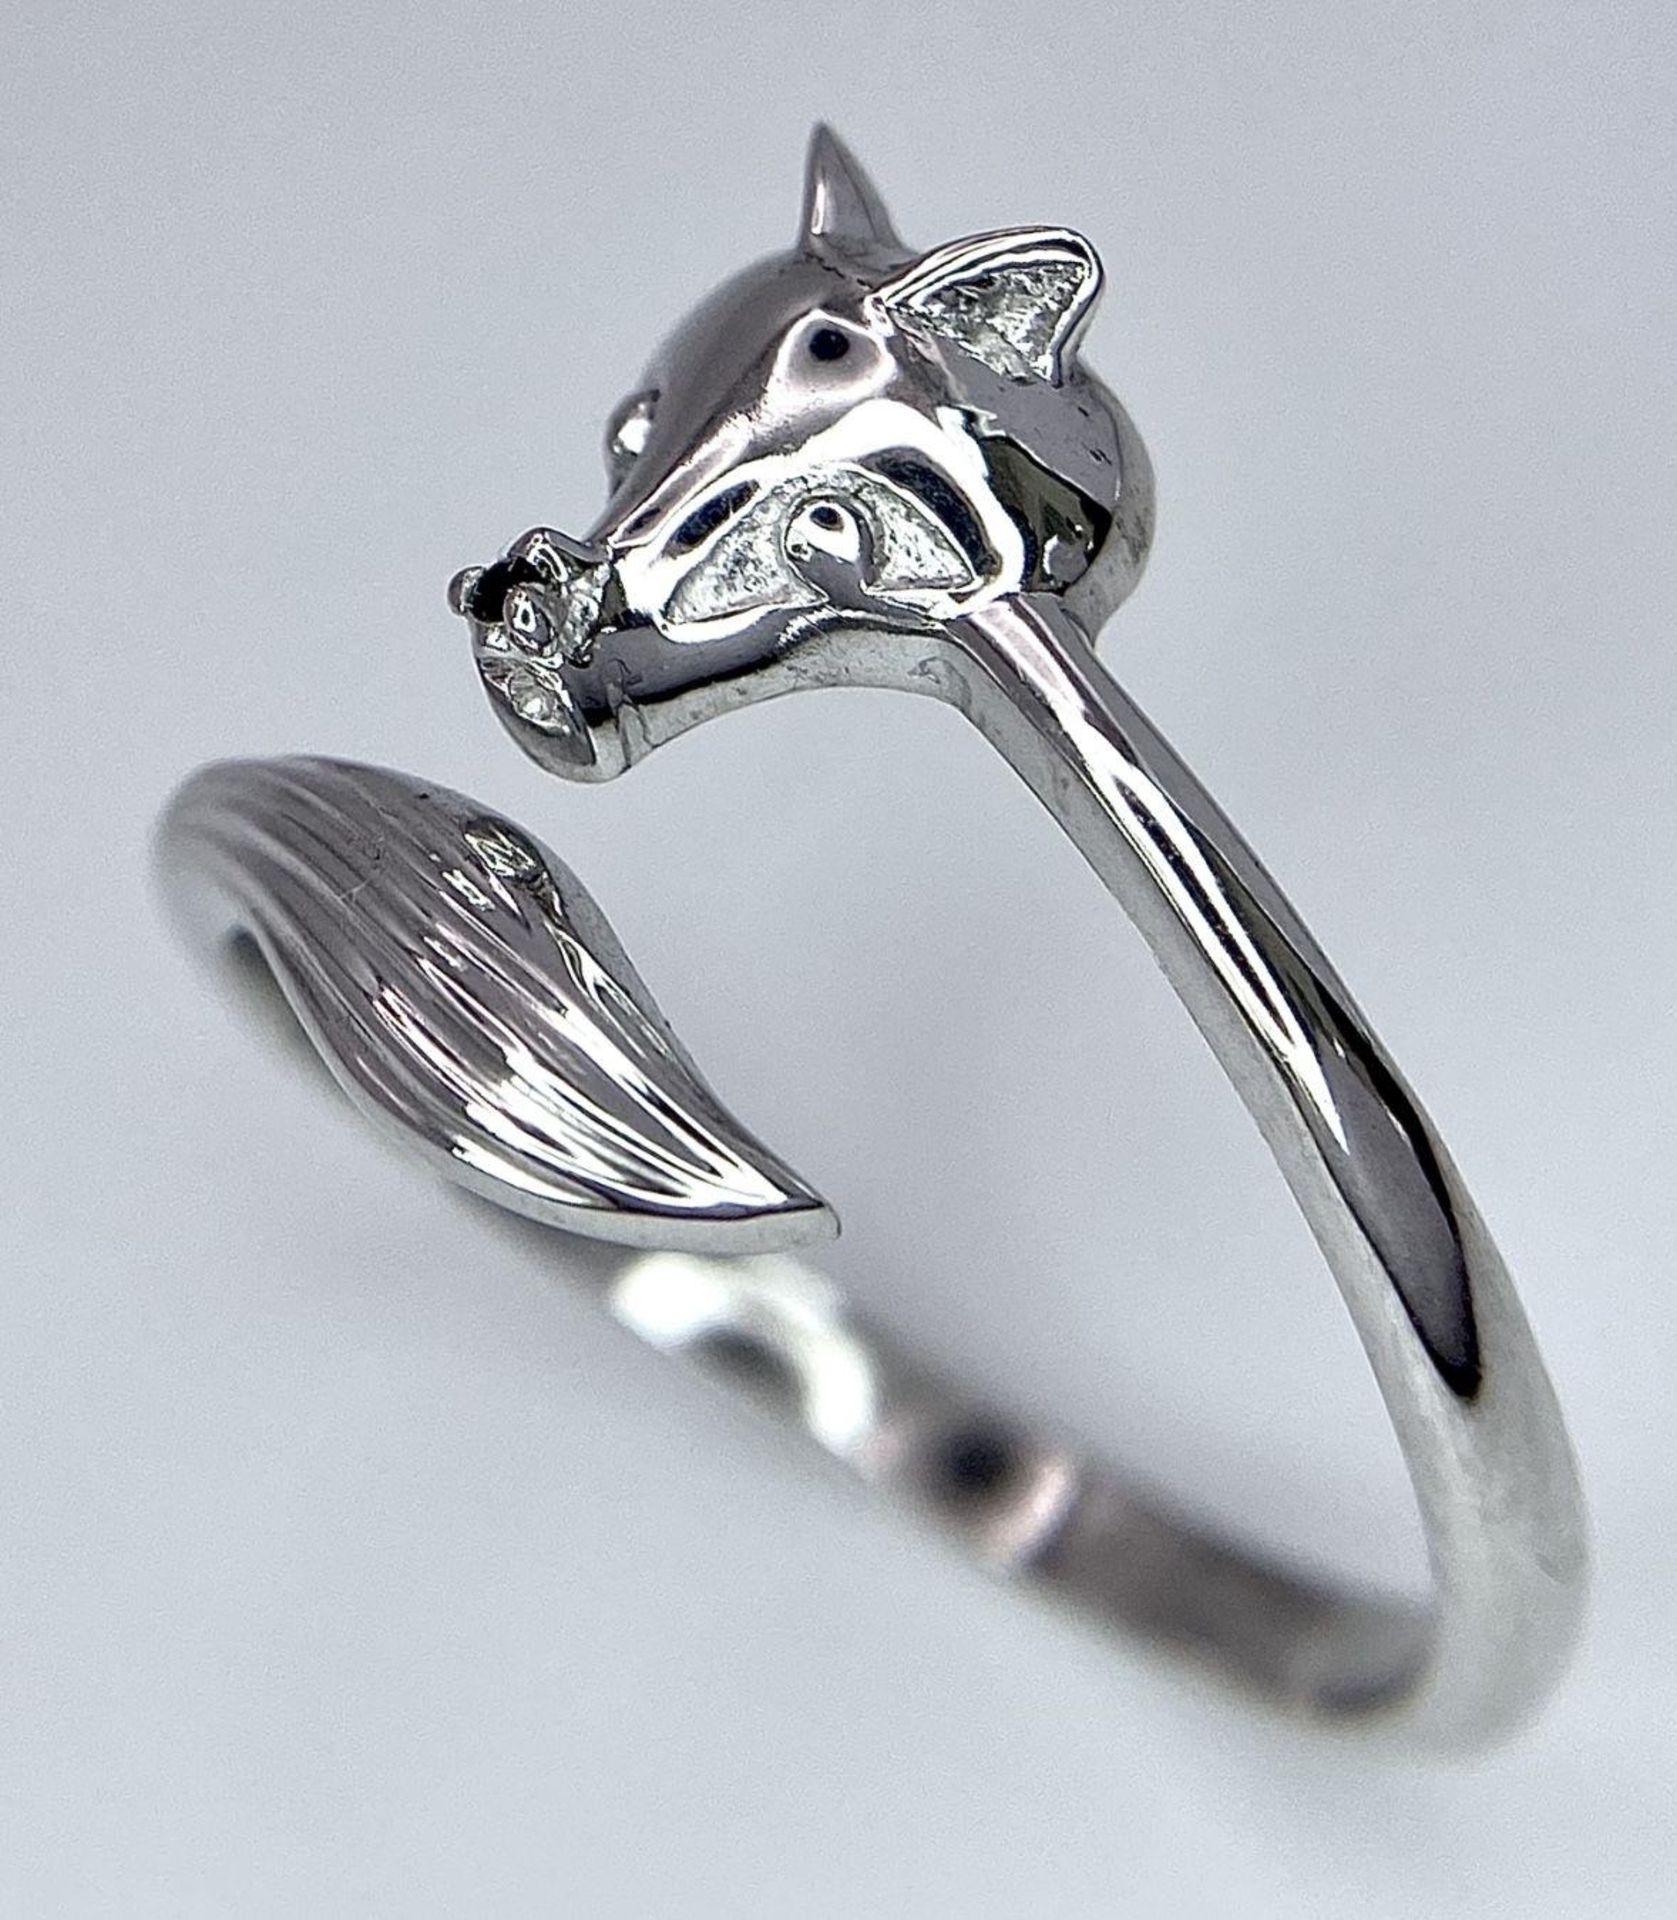 A Limited Edition (1 of 435) Sterling Silver and African Black Diamond Set ‘Fox’ Design Ring Size - Image 5 of 8